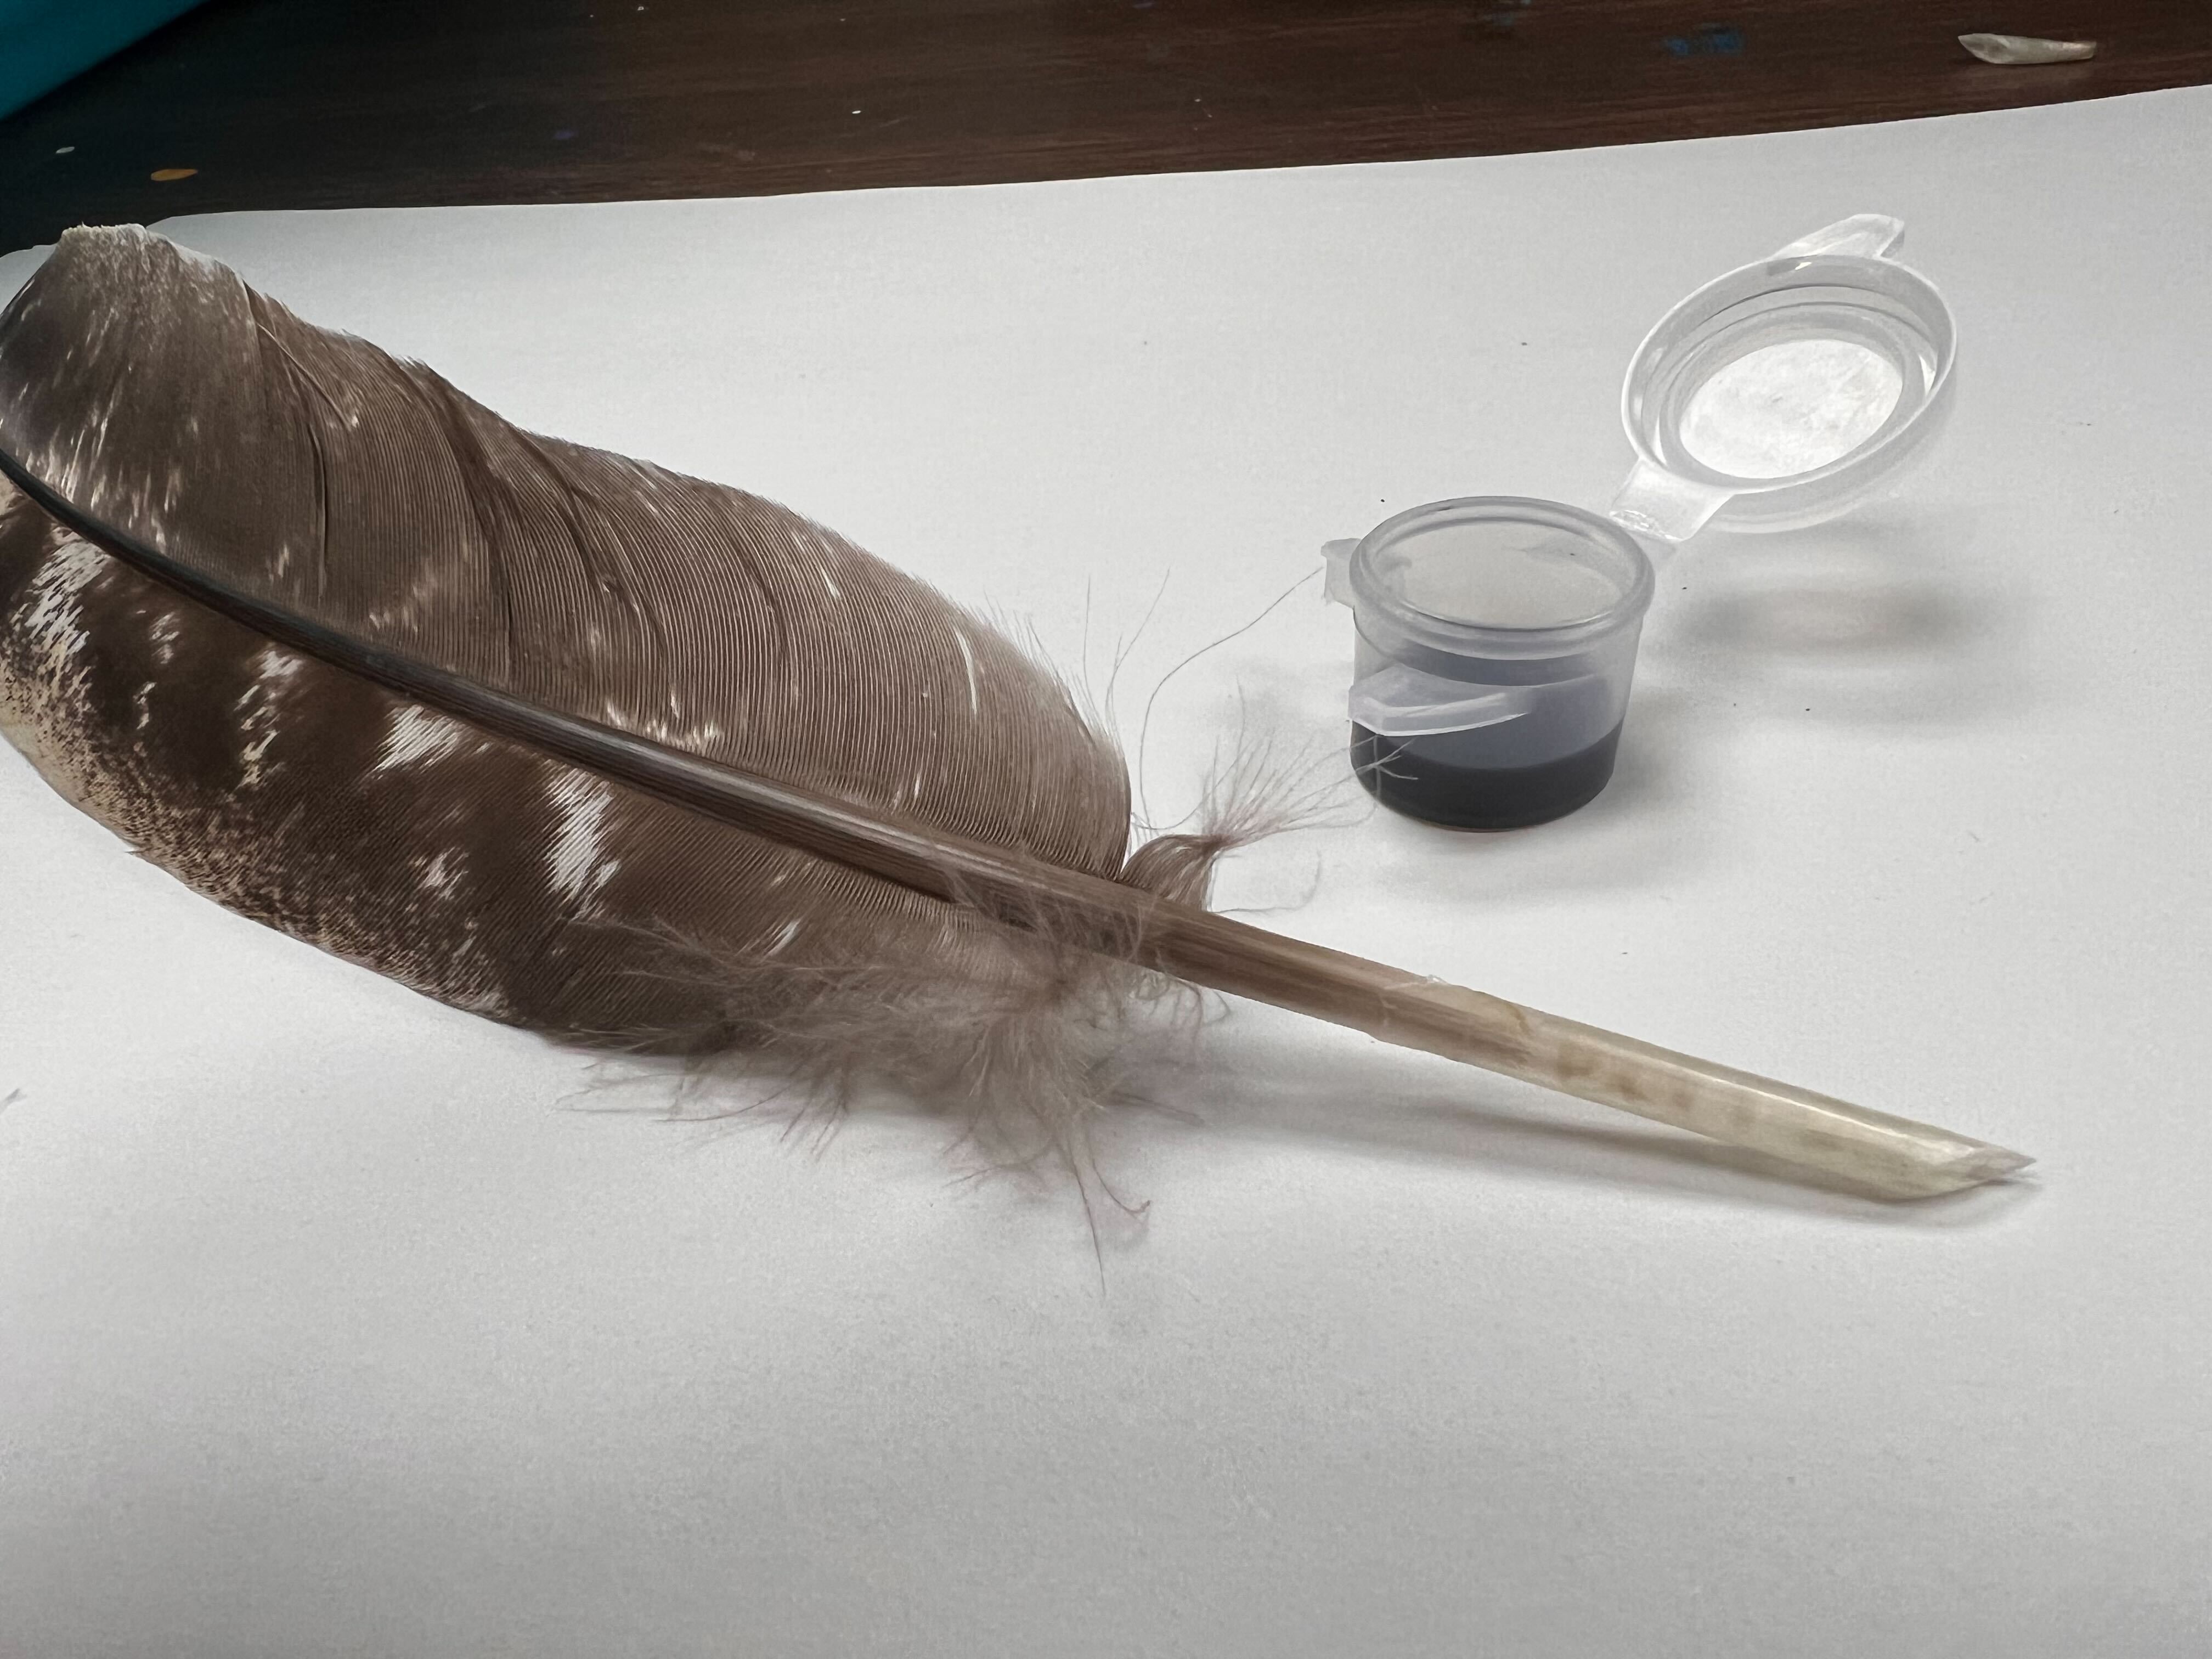 Feather pen and inkwell